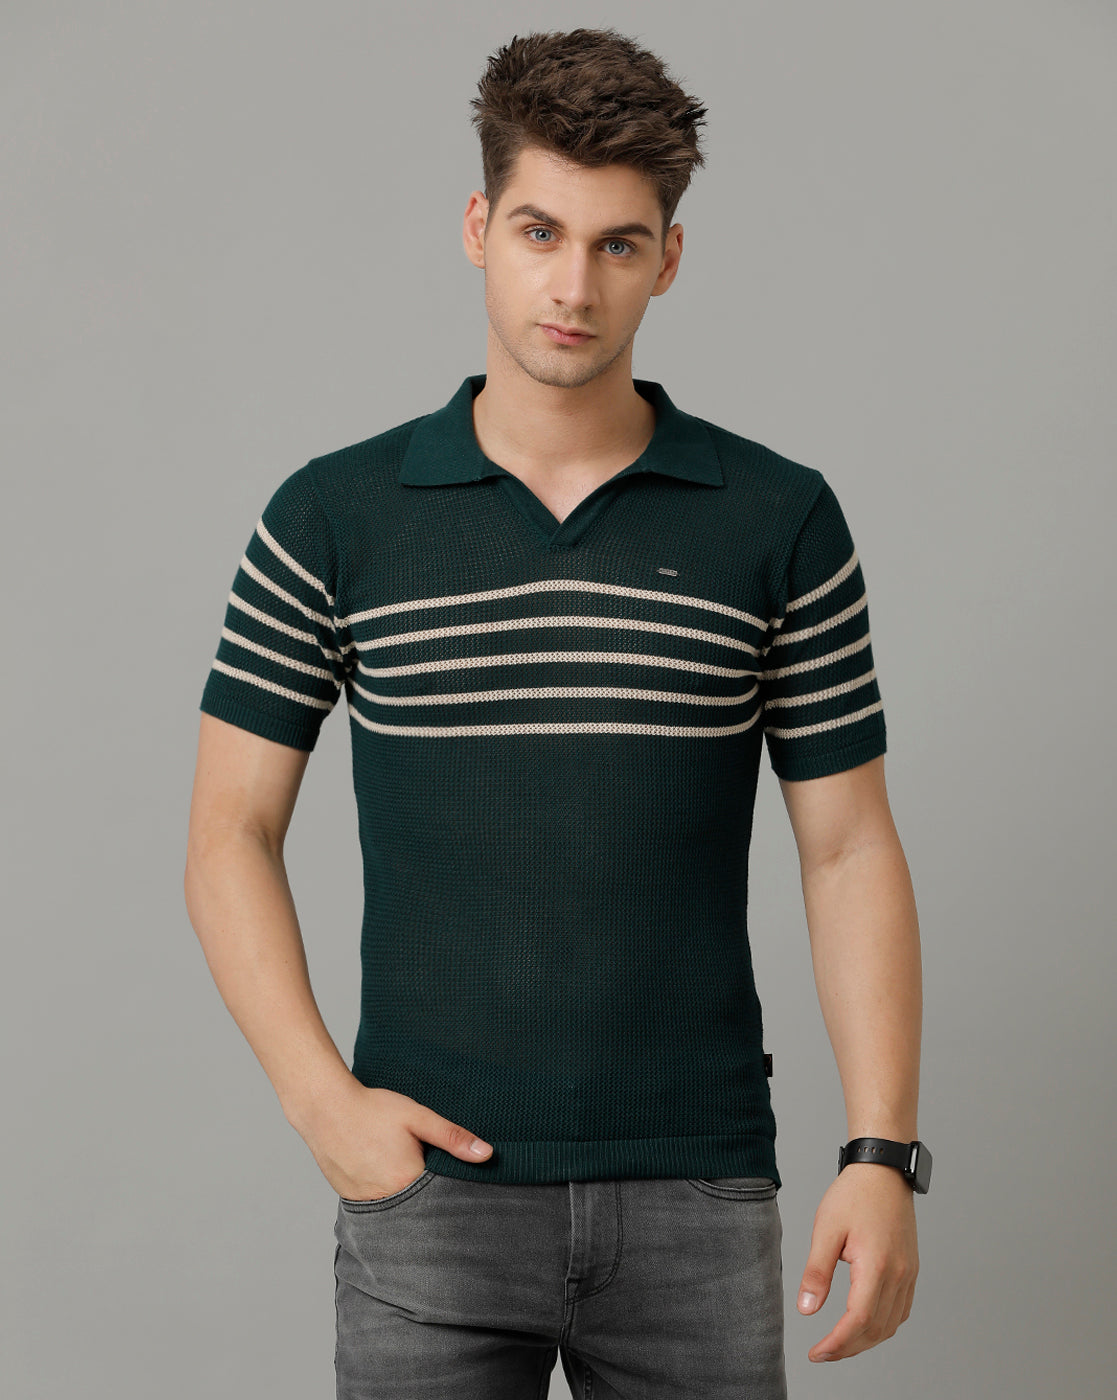 Identiti Green Half Sleeve Striped Slim Fit Cotton Casual Polo T-Shirt For Men.